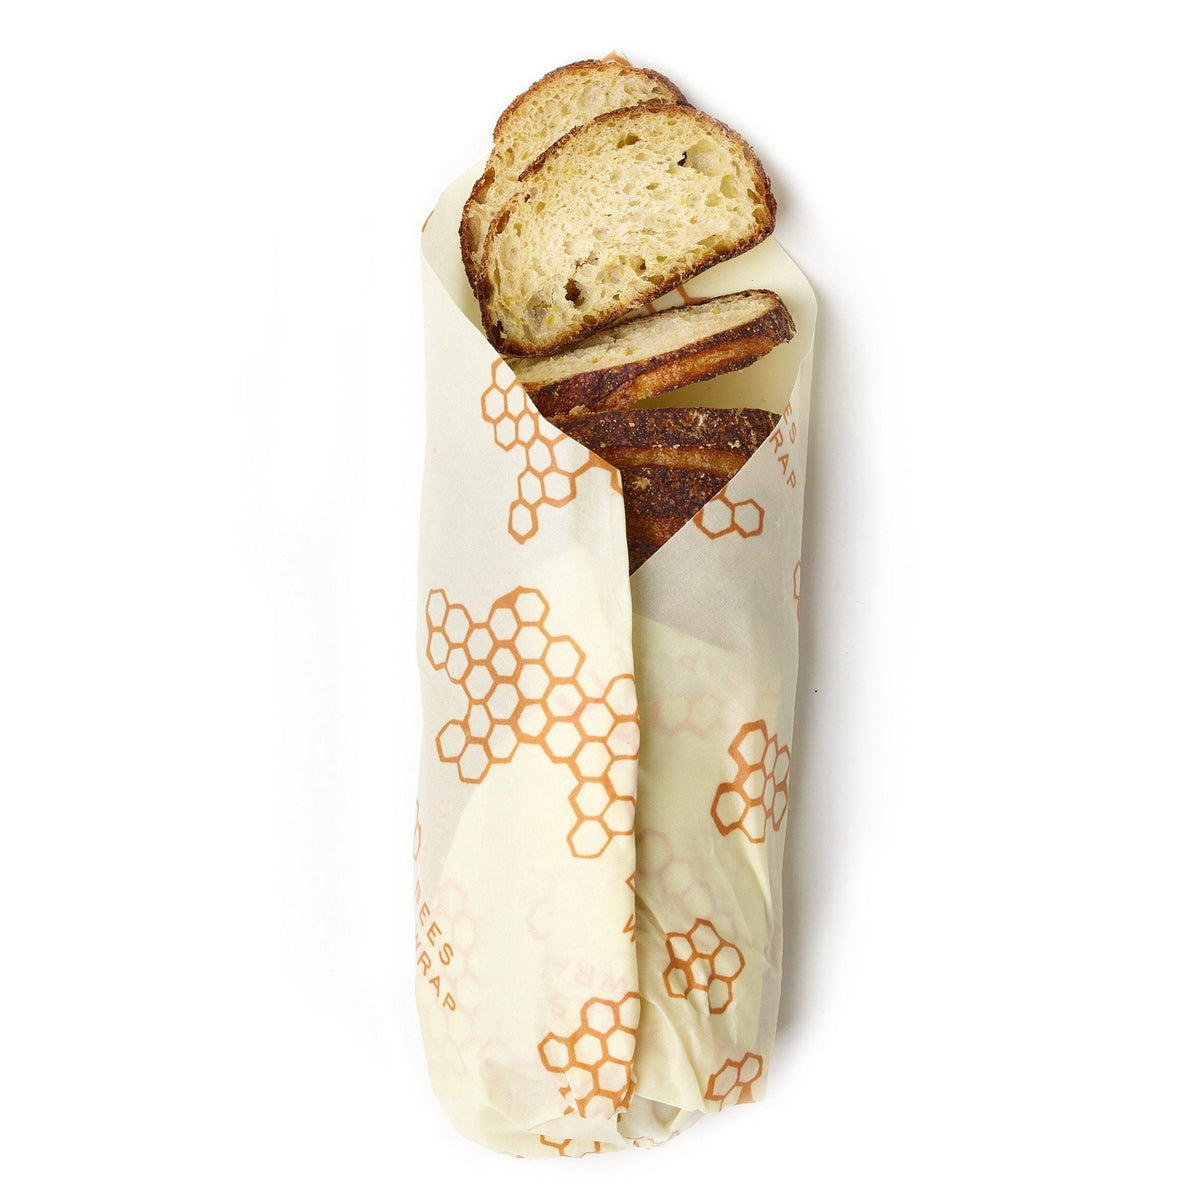 X-Large Bee's Wrap Storage For Bread - Honeycomb Design